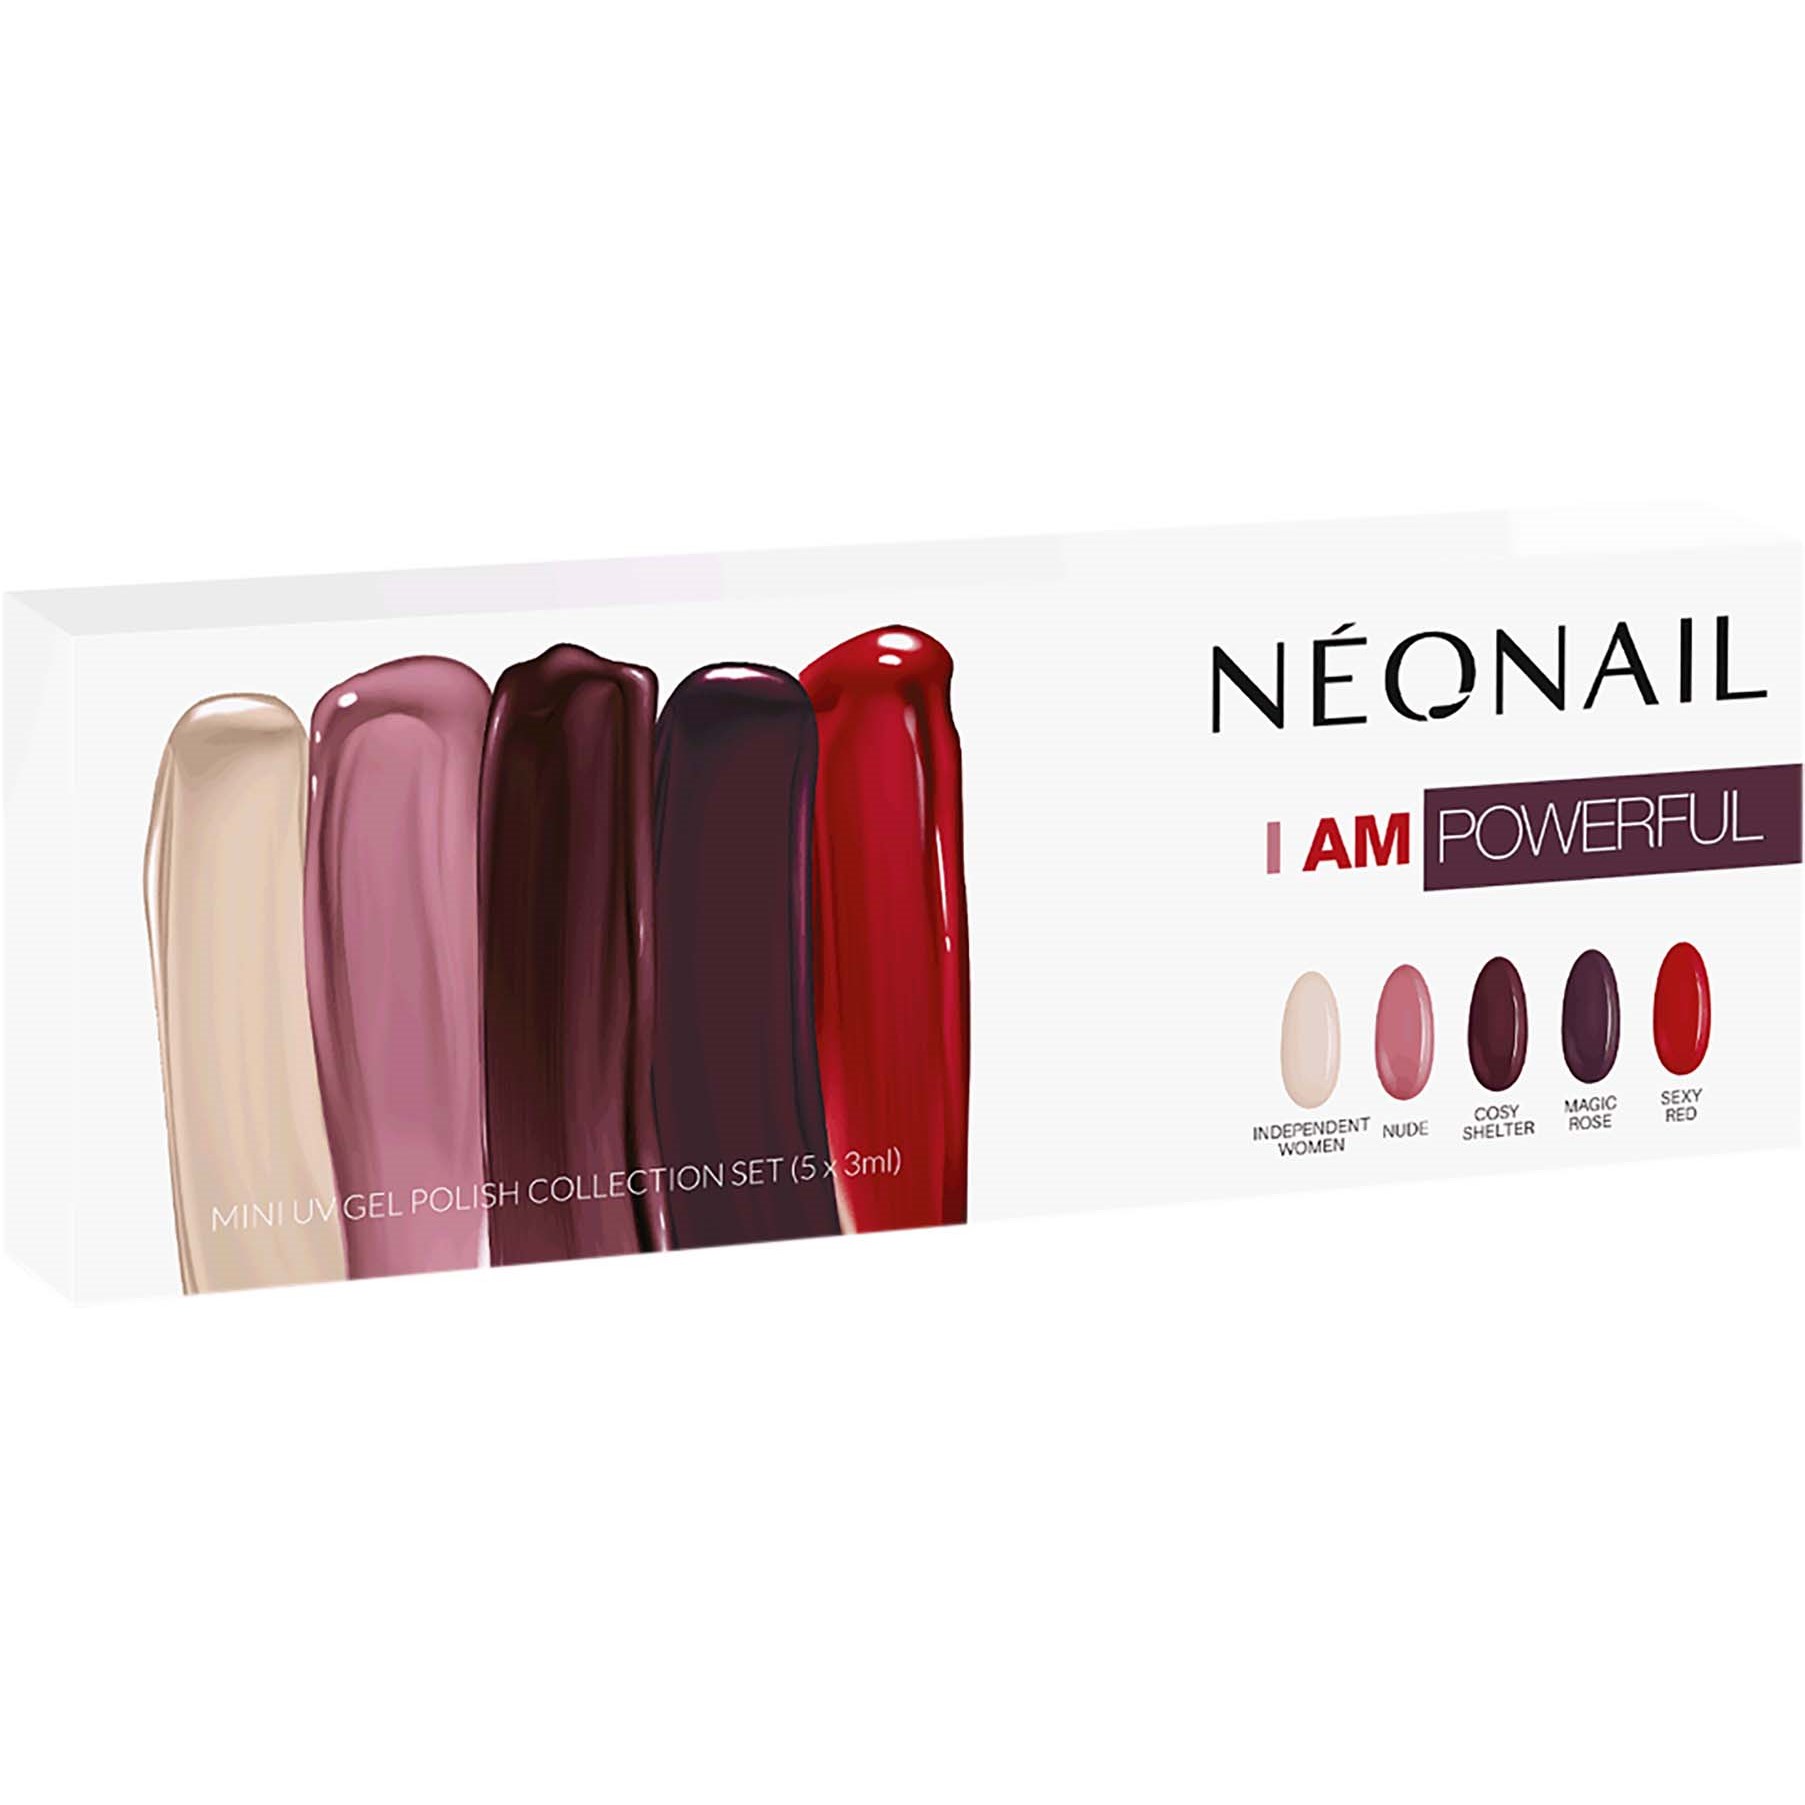 NEONAIL Collection Set I am powerful